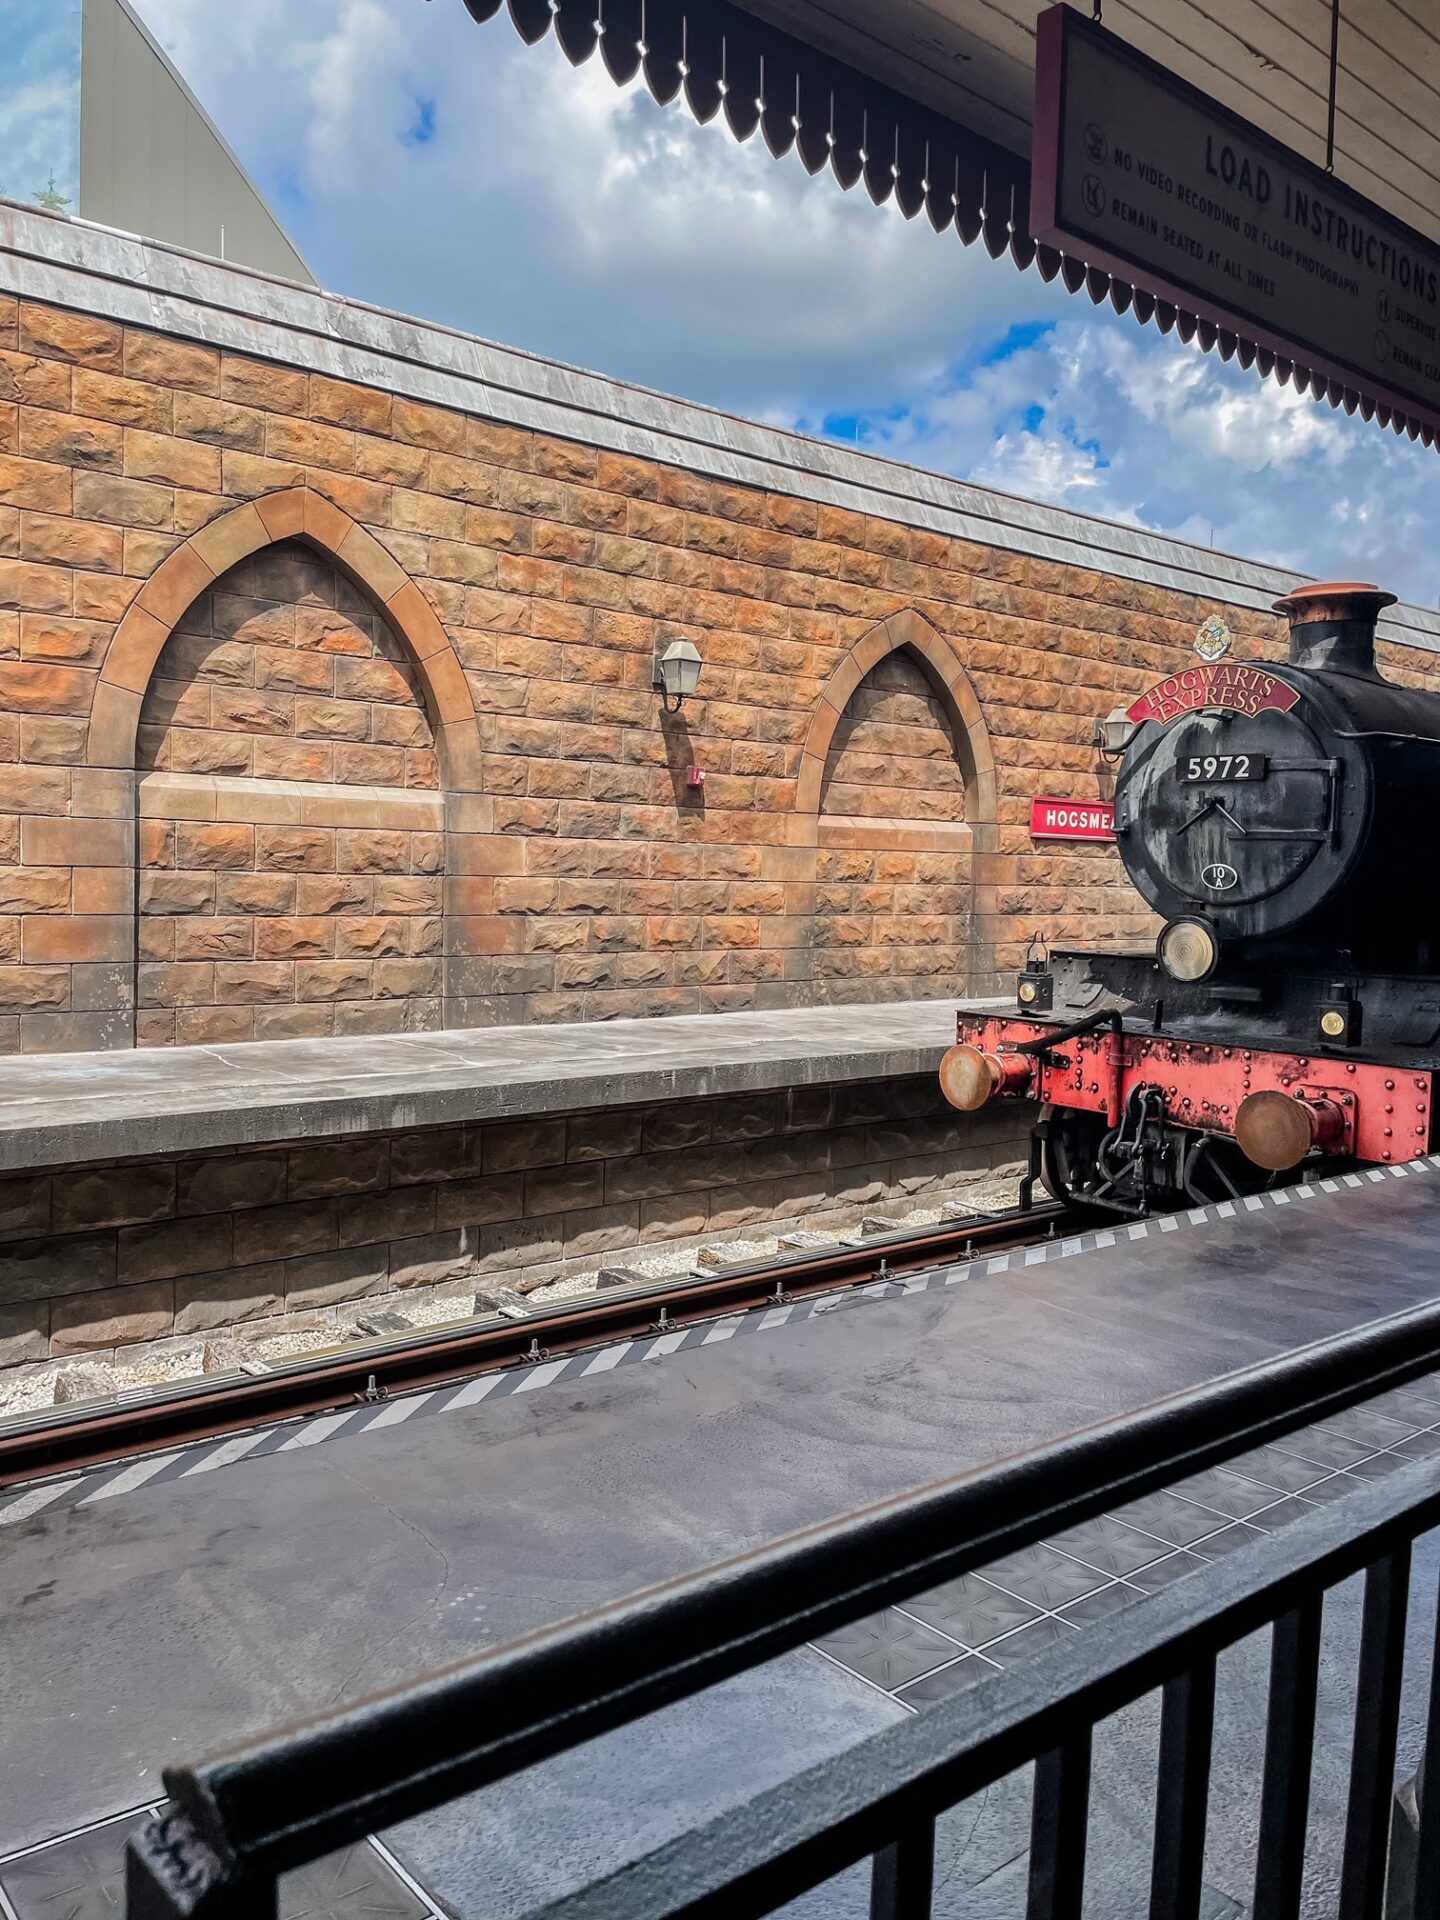 Our Anniversary Trip to Universal Orlando Resort - with things to do at Universal Studios Orlando when it rains, must-see spots at Harry Potter World, + MORE!